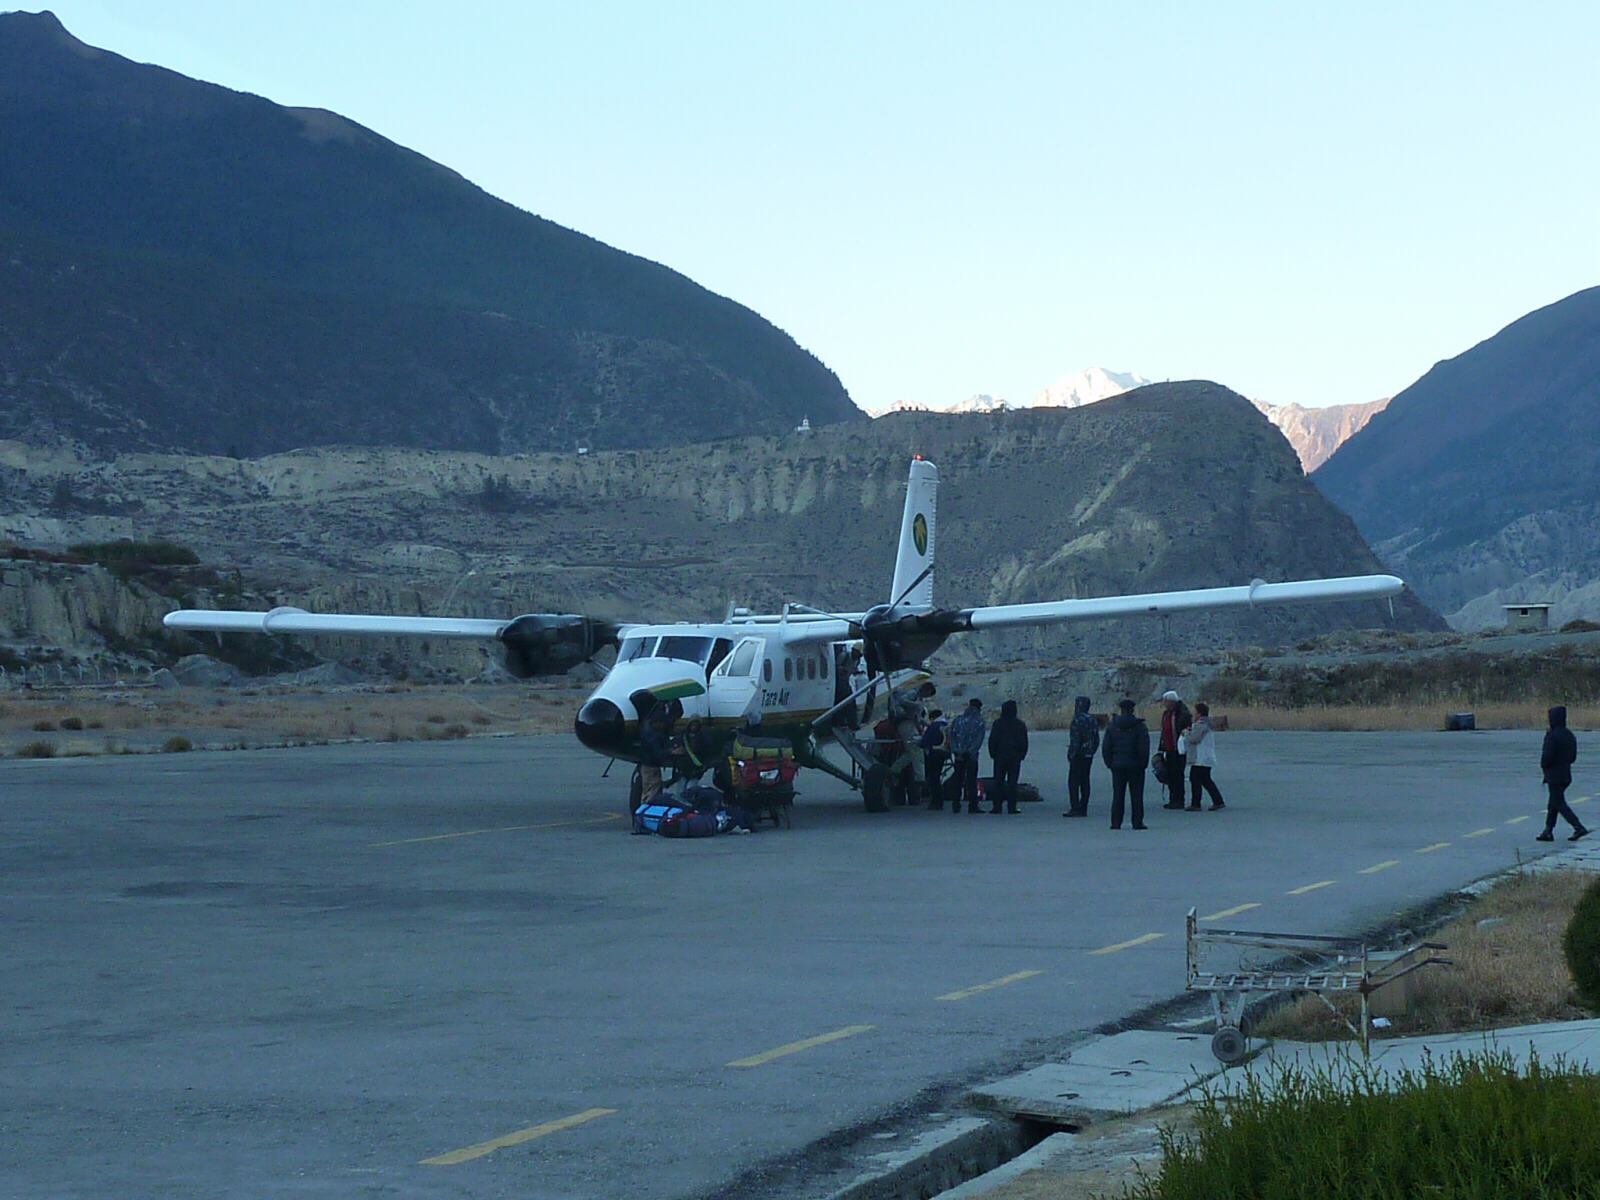 Our plane at Jomsom airport for the flight out